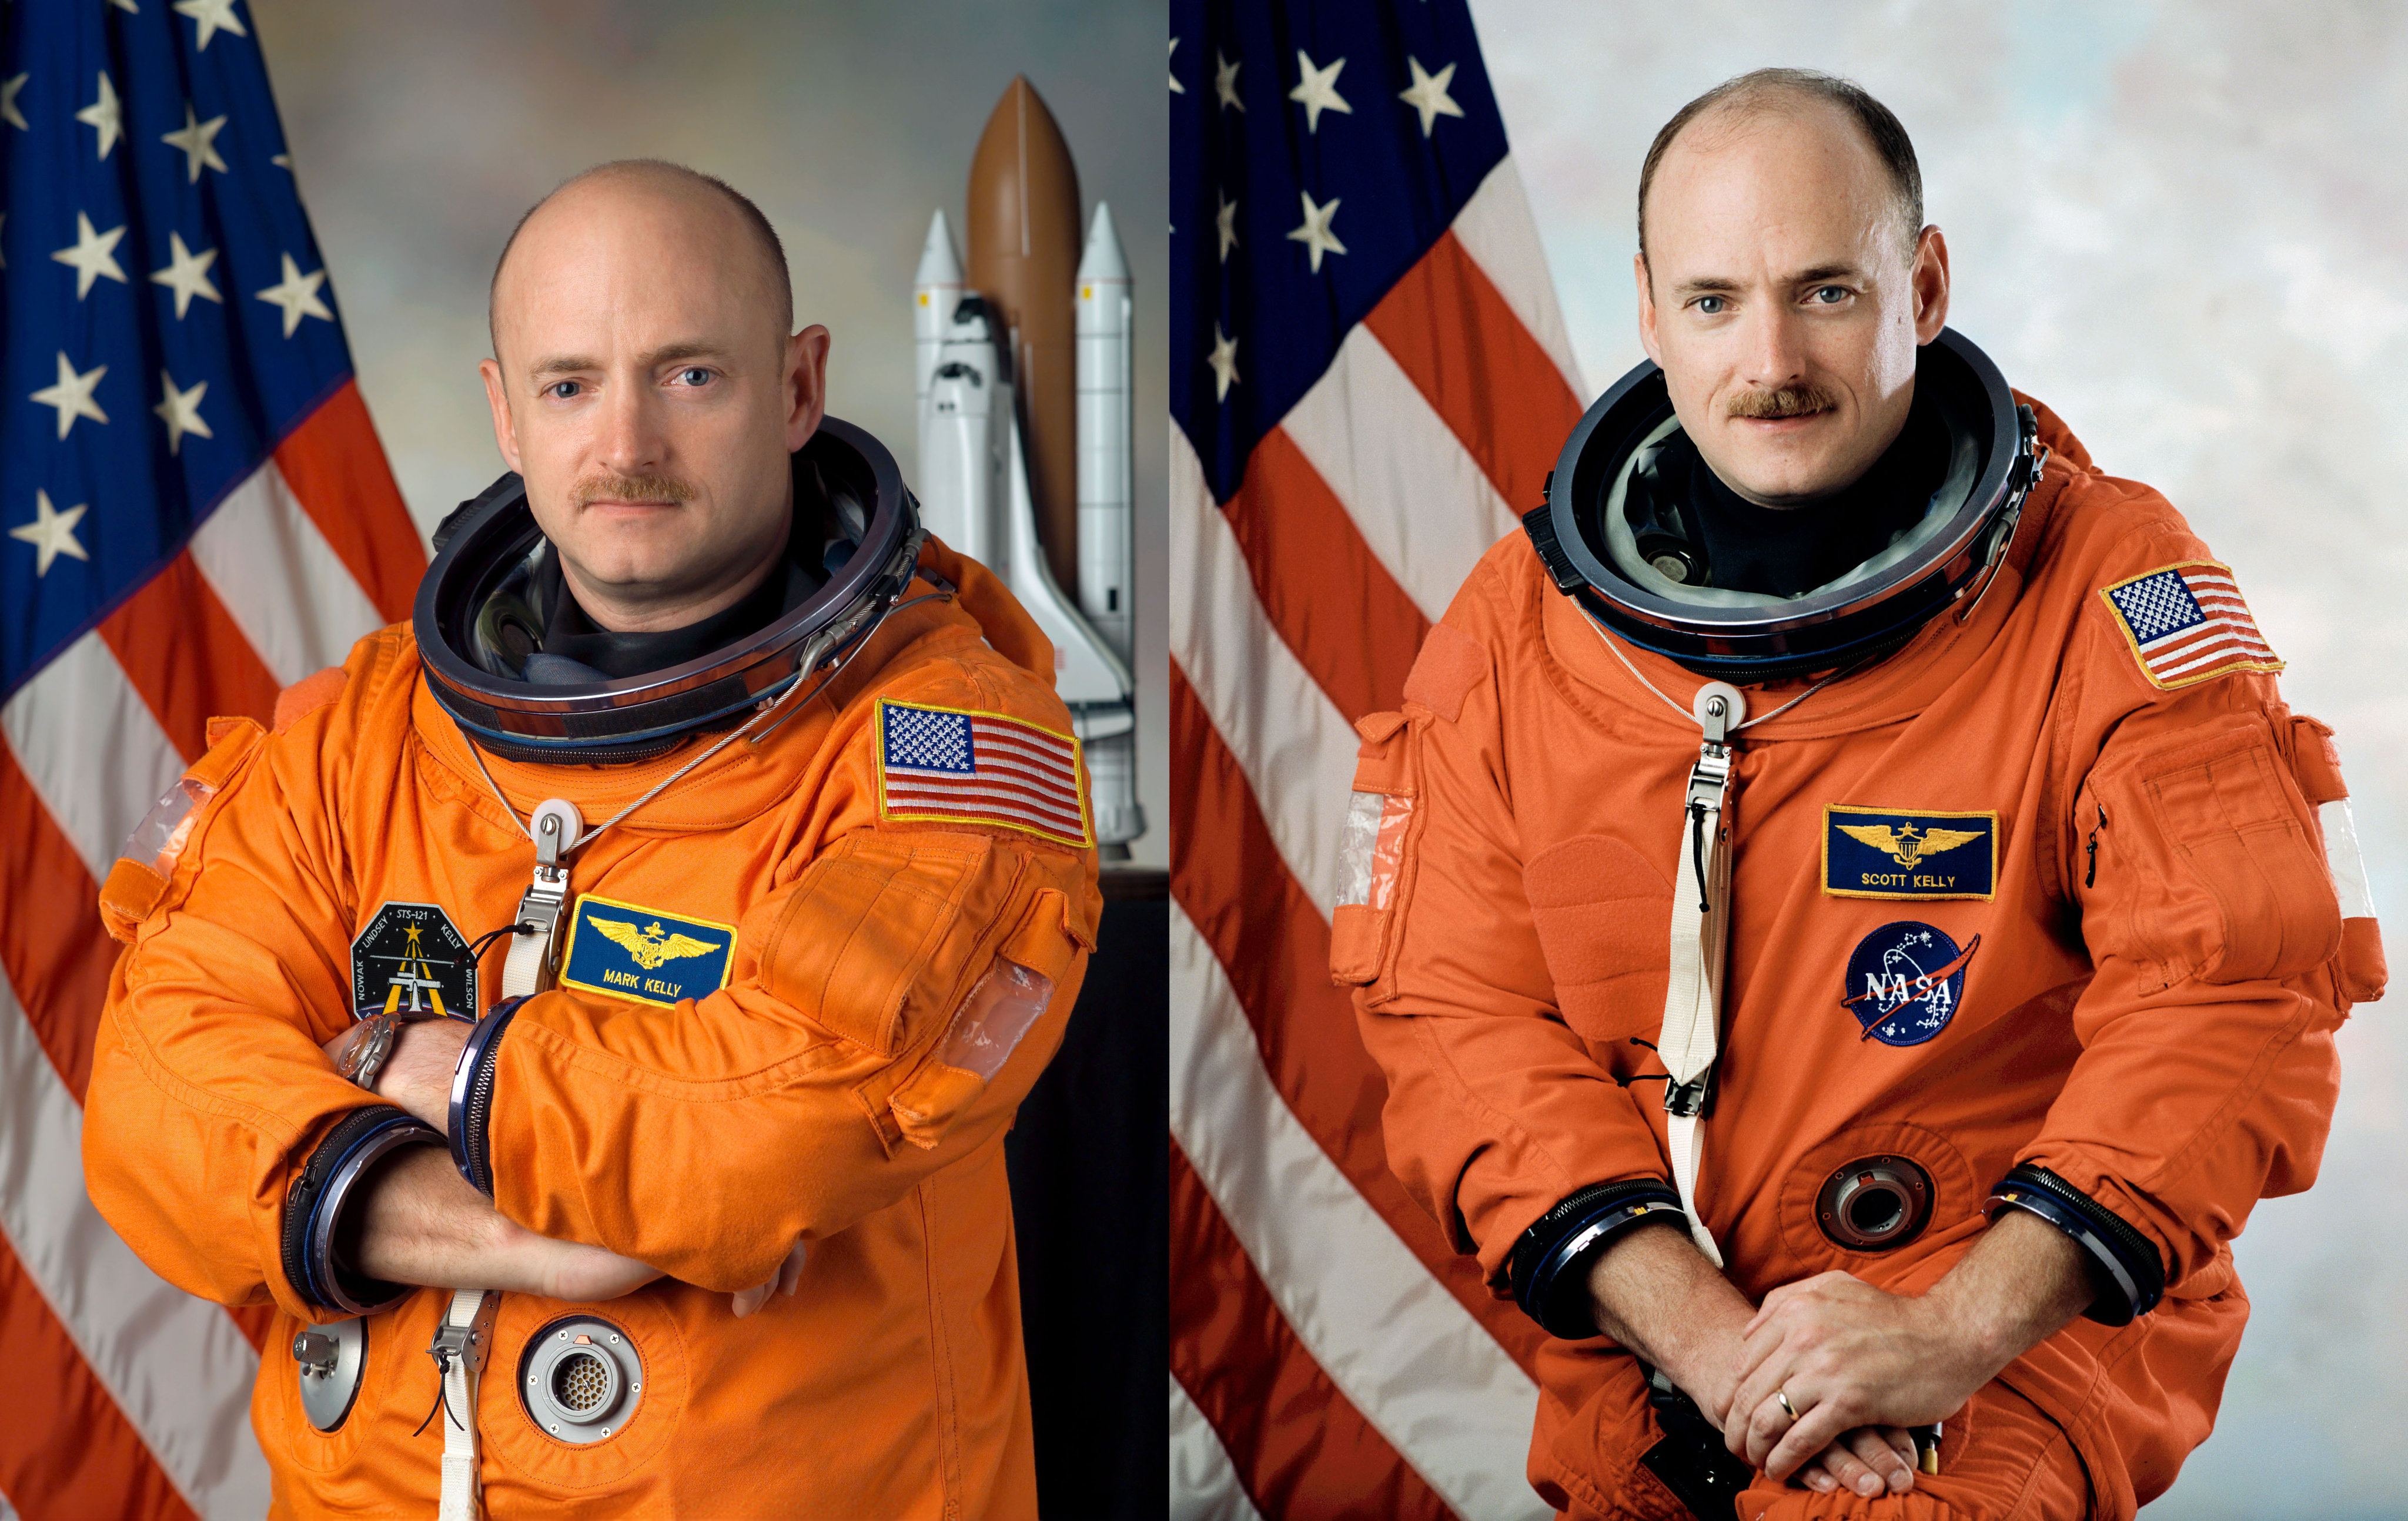 On the left is a portrait photo of a man wearing an orange space suit that is decorated with badges. His arms are crossed. There is an American flag and a model of a space rocket in the background. On the right is a portrait photo of a man wearing an orange space suit decorated with badges. His hands are placed on one of his knees. There is an American flag in the background.